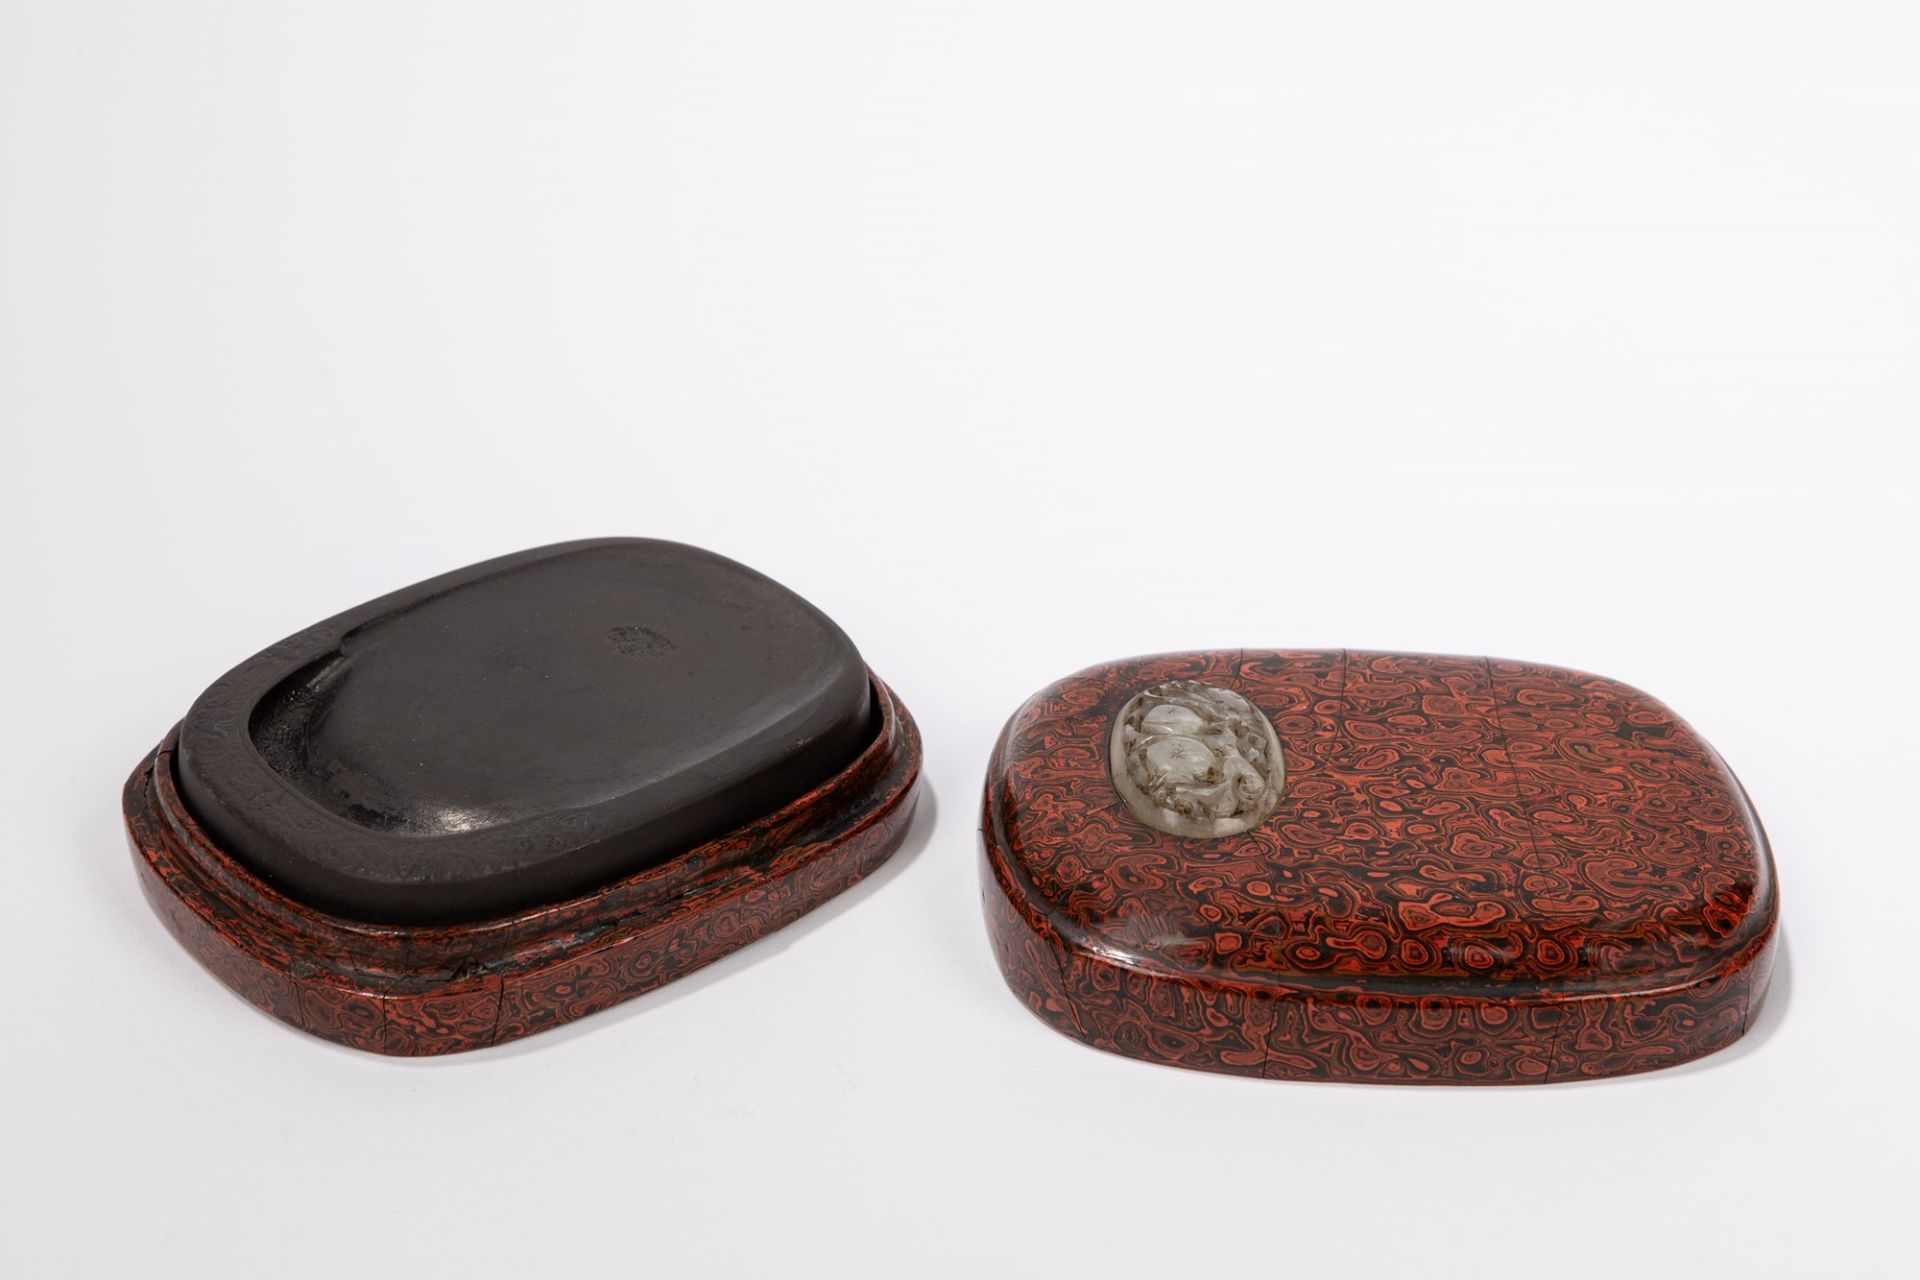 INK STONE WITH LACQUER BOX, China, Qing dynasty, 18th / 19th century - Image 3 of 4